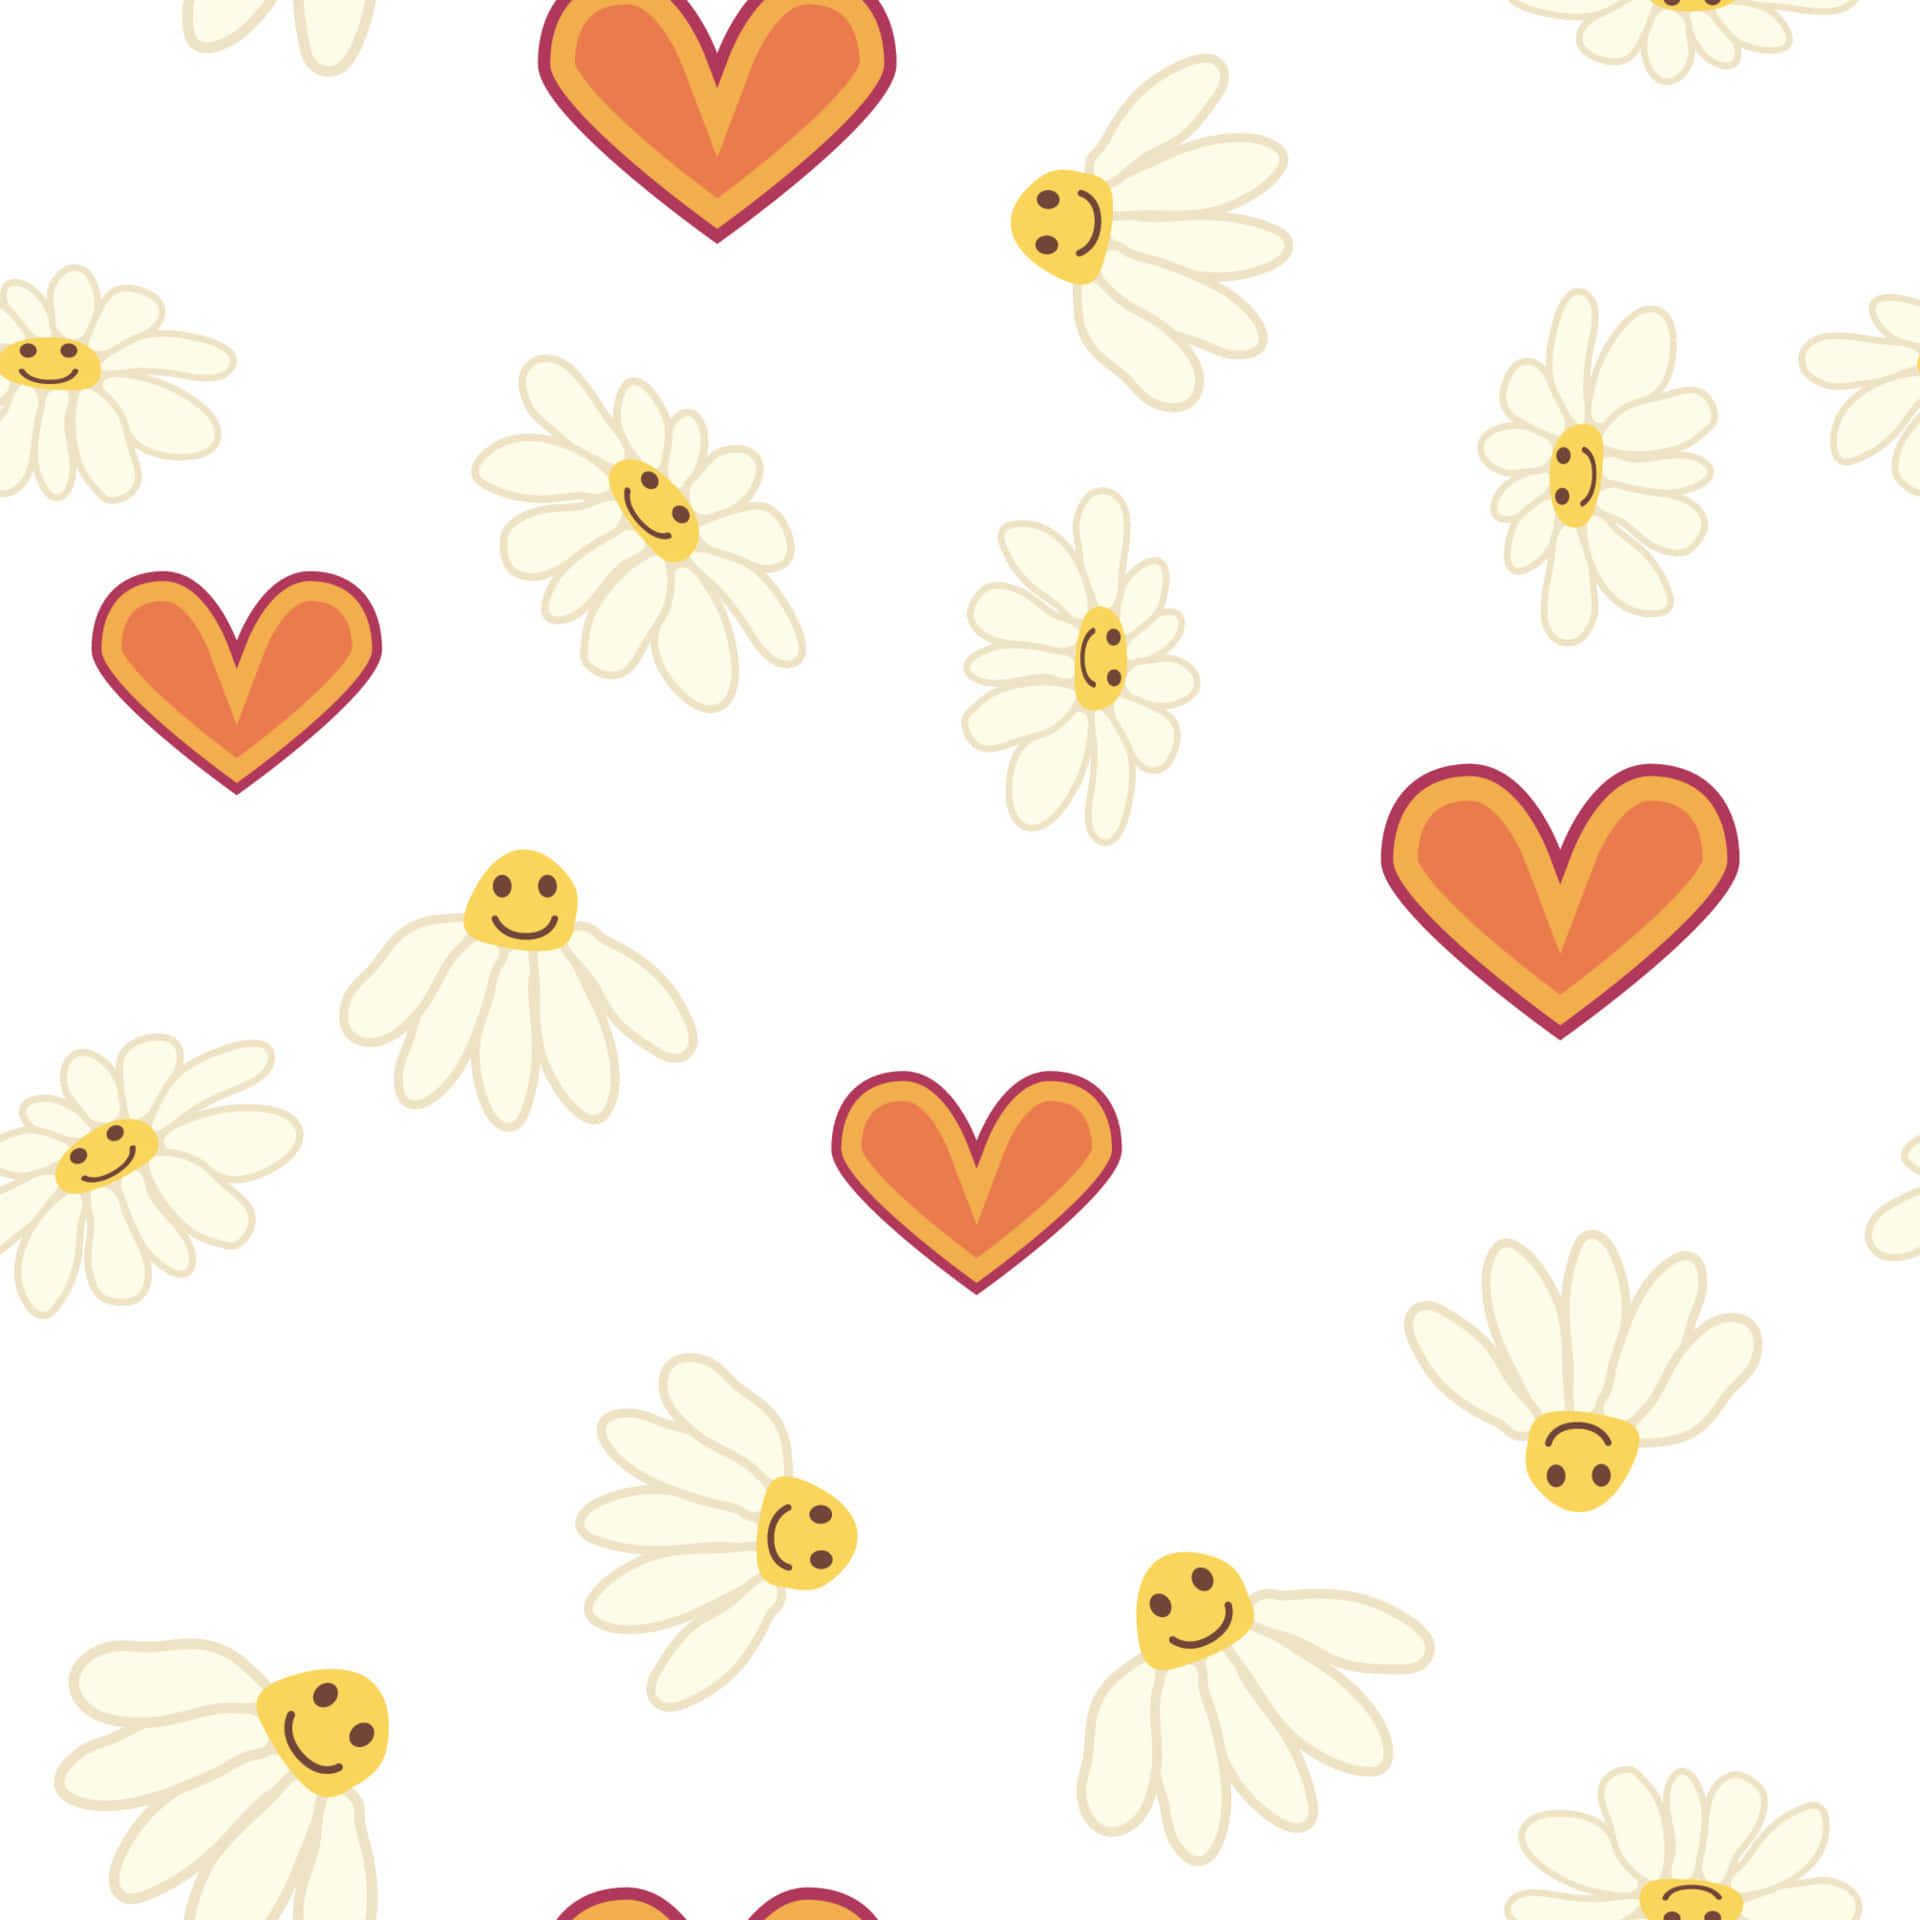 A Pattern Of Daisies With Hearts And Smiley Faces Wallpaper